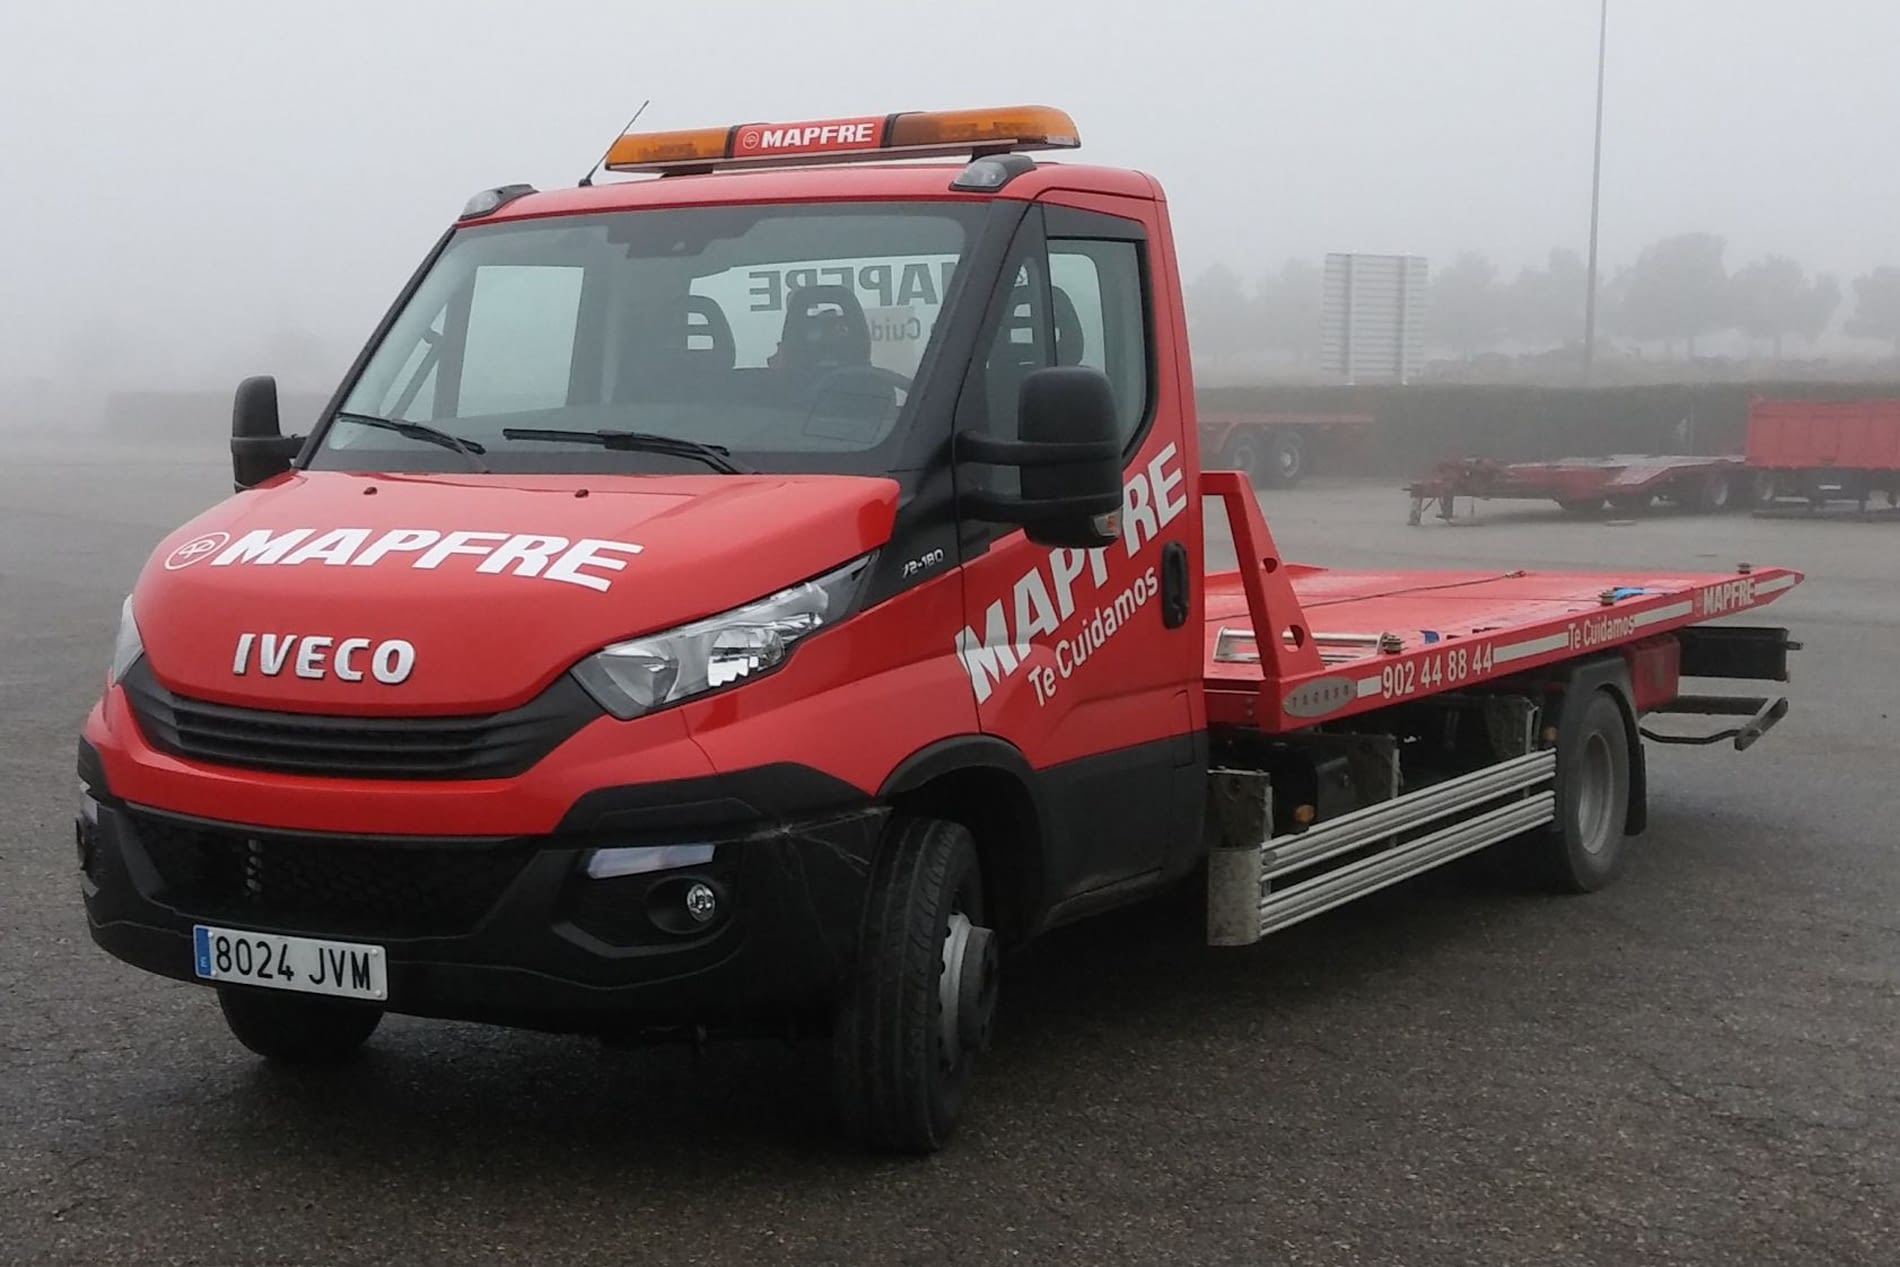 Camionet IVECO mapfre